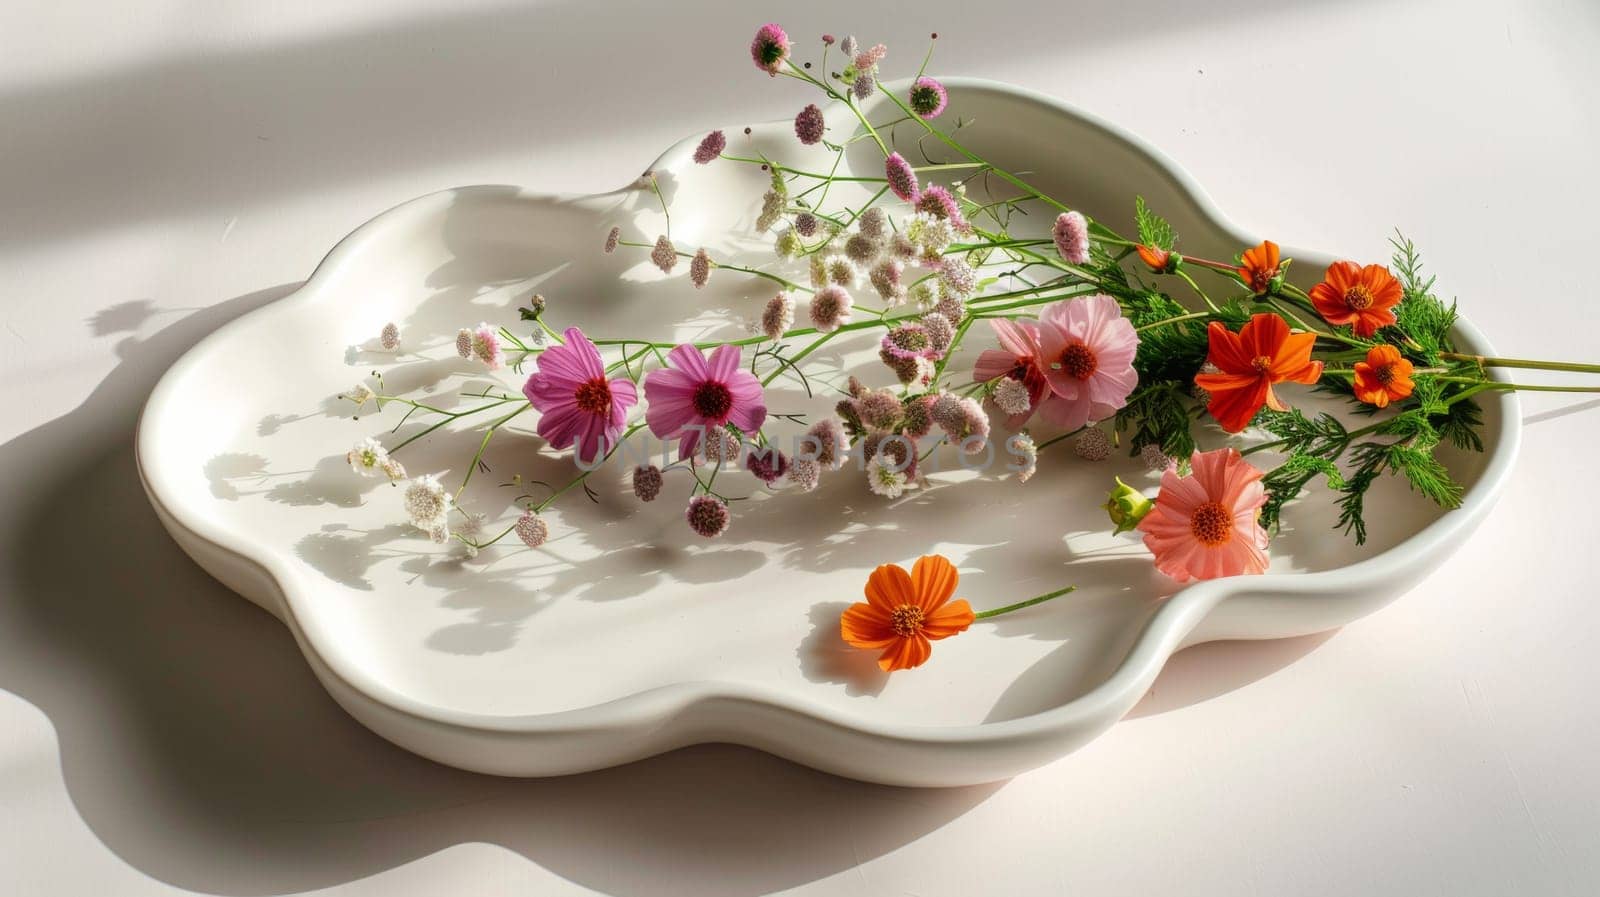 A white plate with flowers on it sitting next to a table